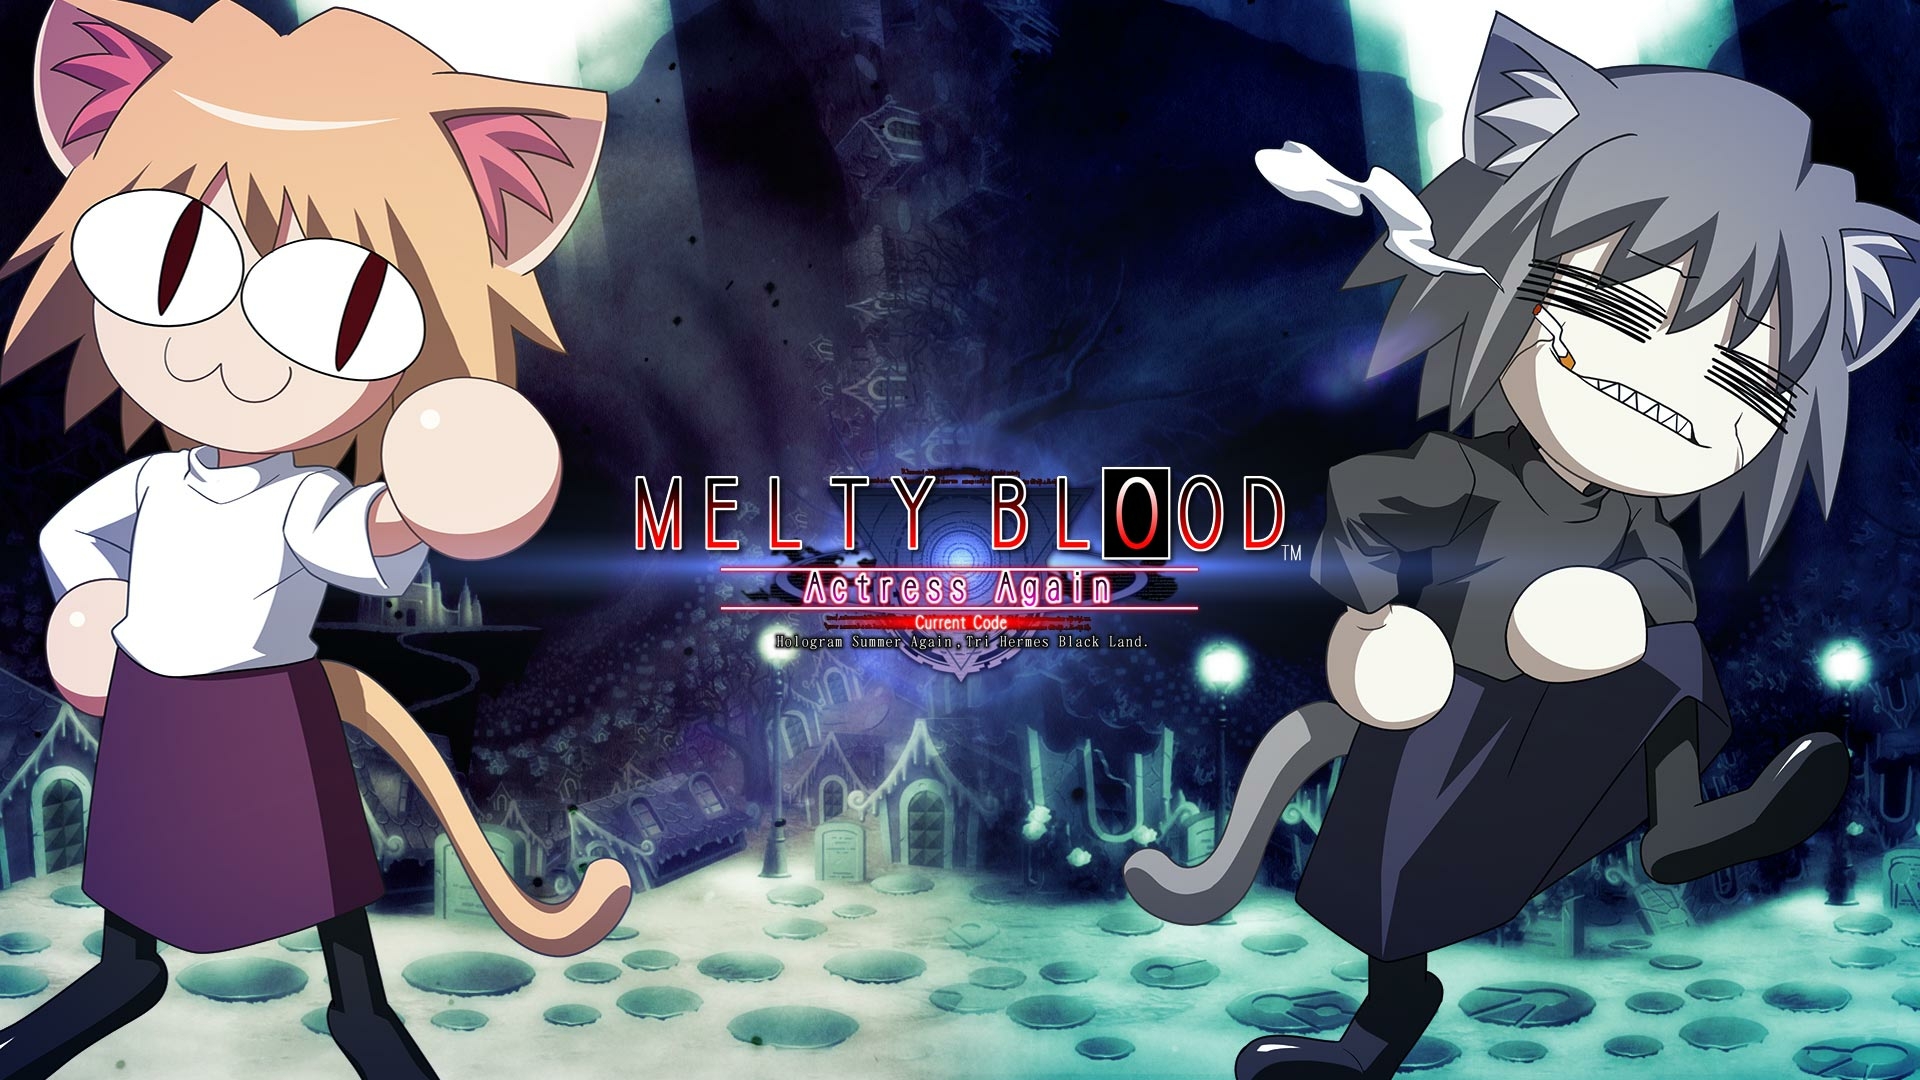 Melty_Blood_Actress_Again_Current_Code_Artwork_9.jpg